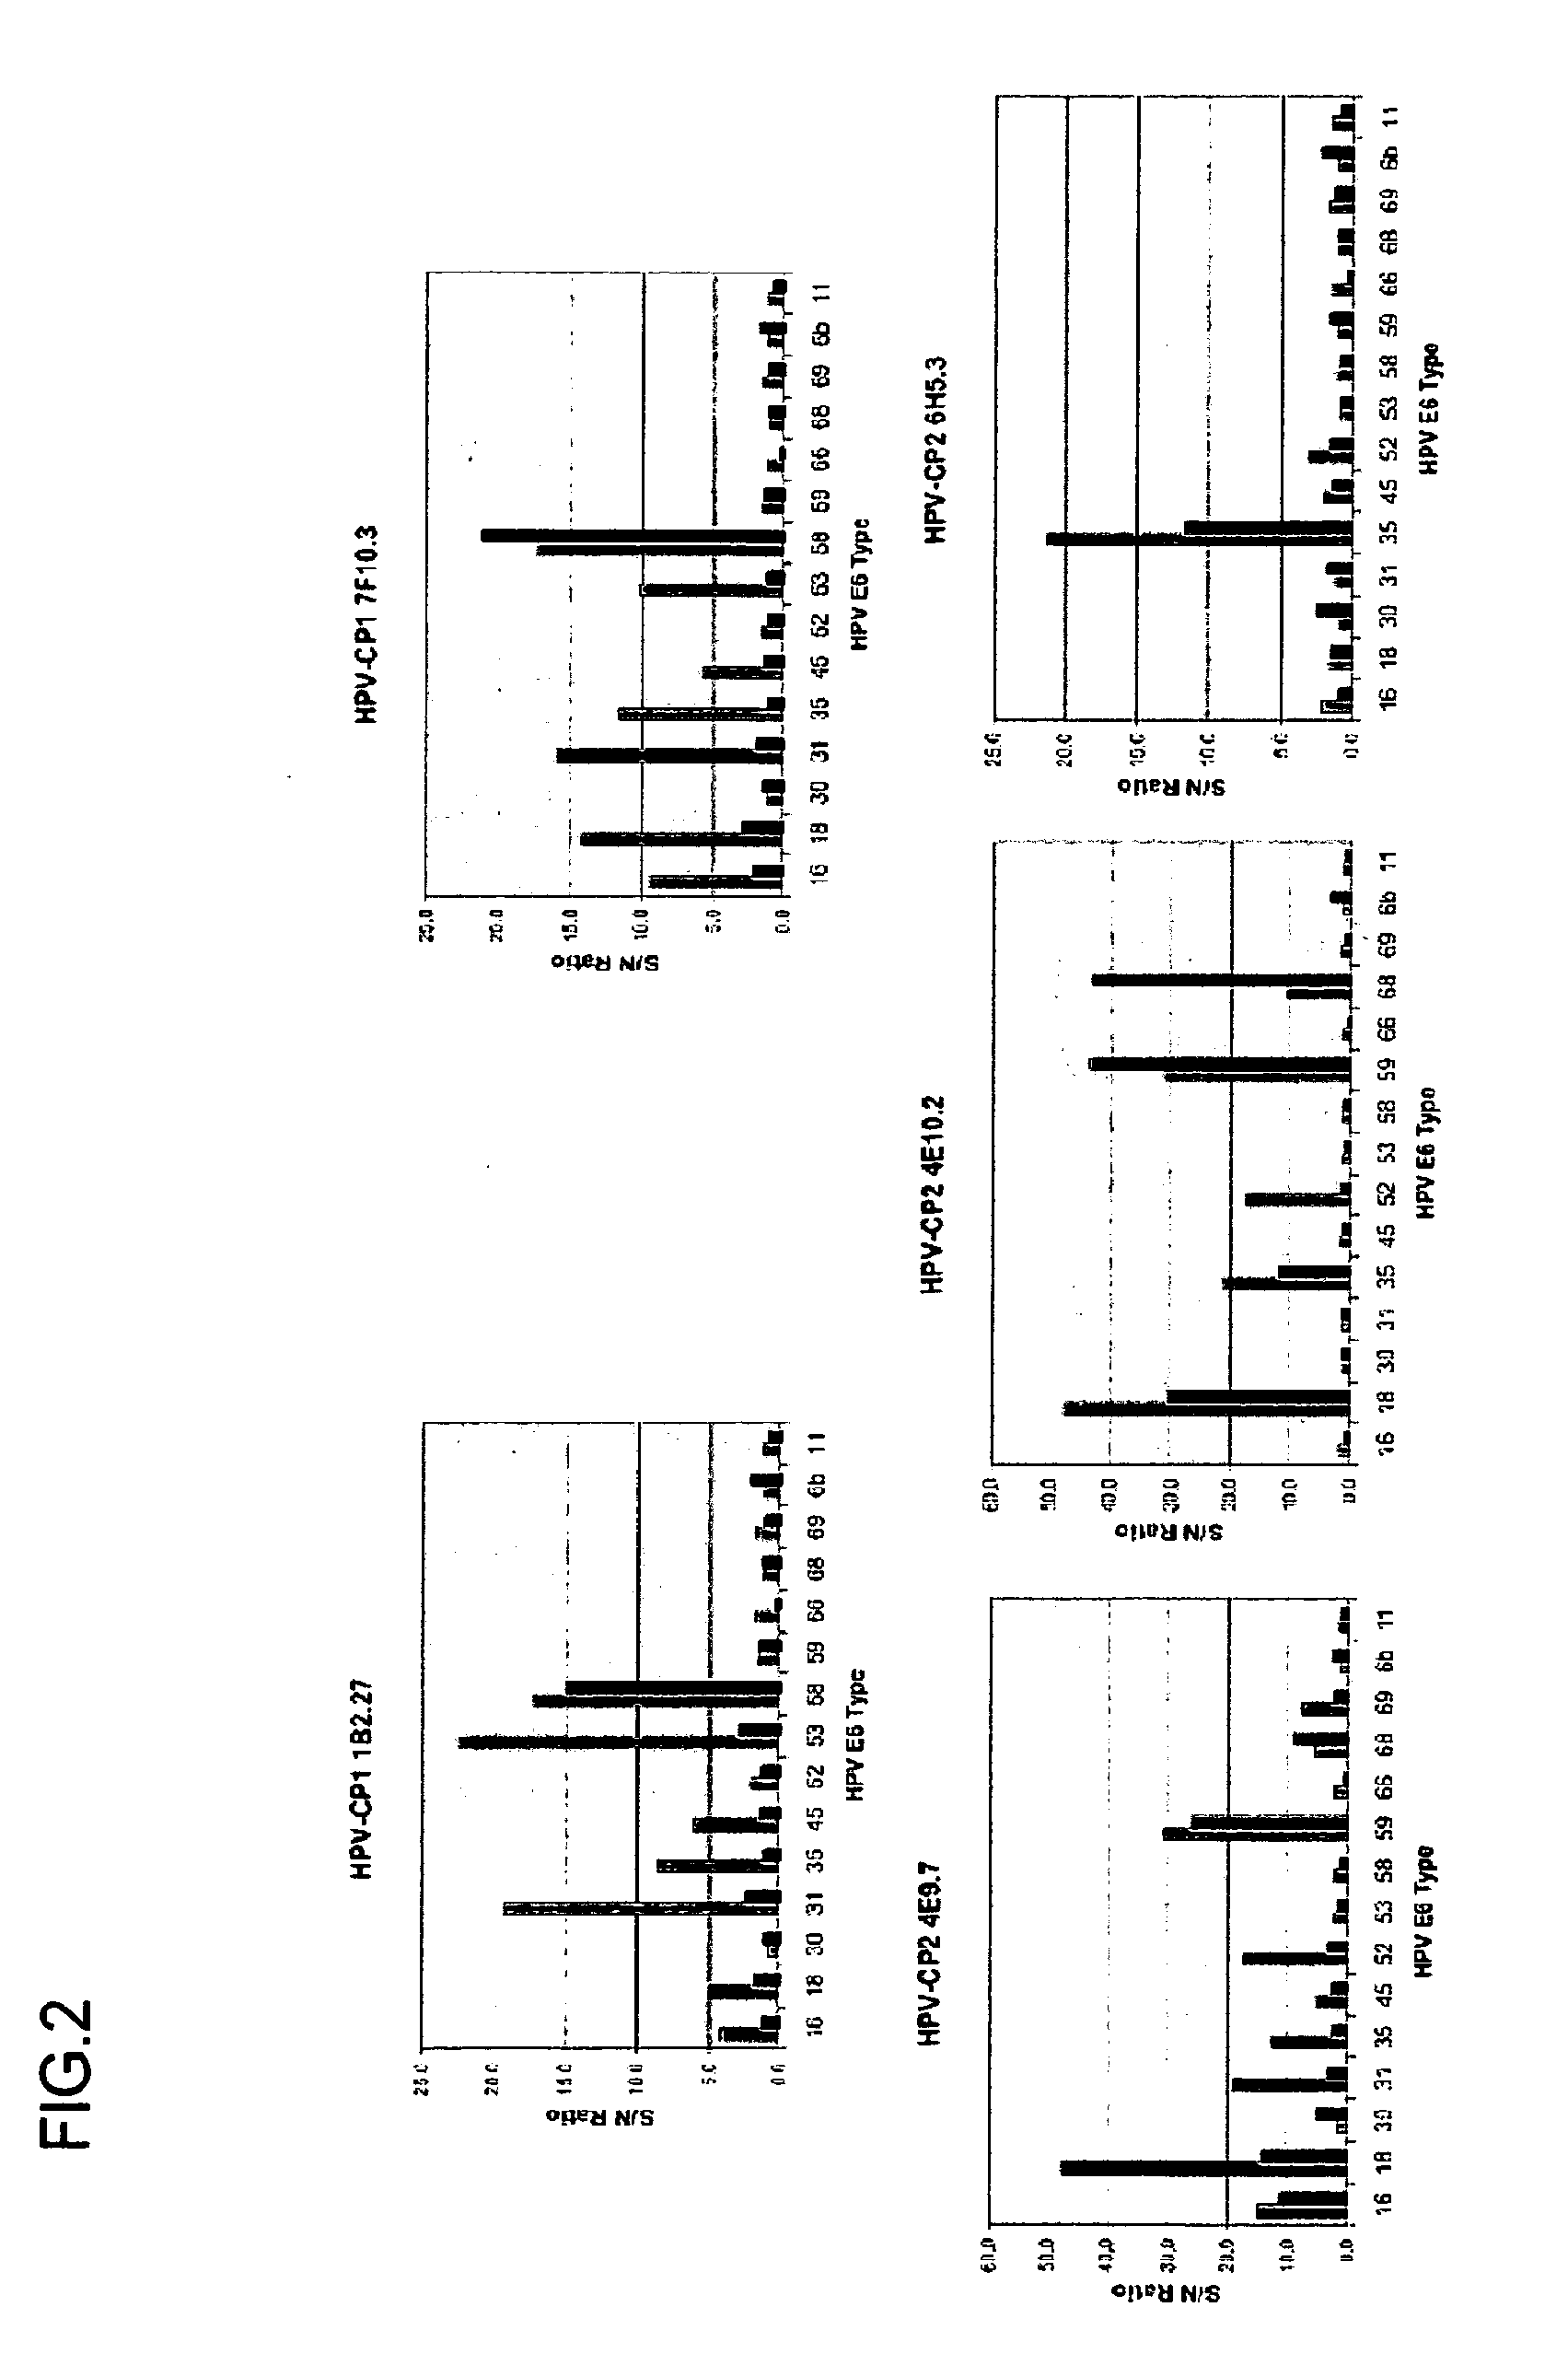 Antibodies specific to e6 proteins of HPV and use thereof